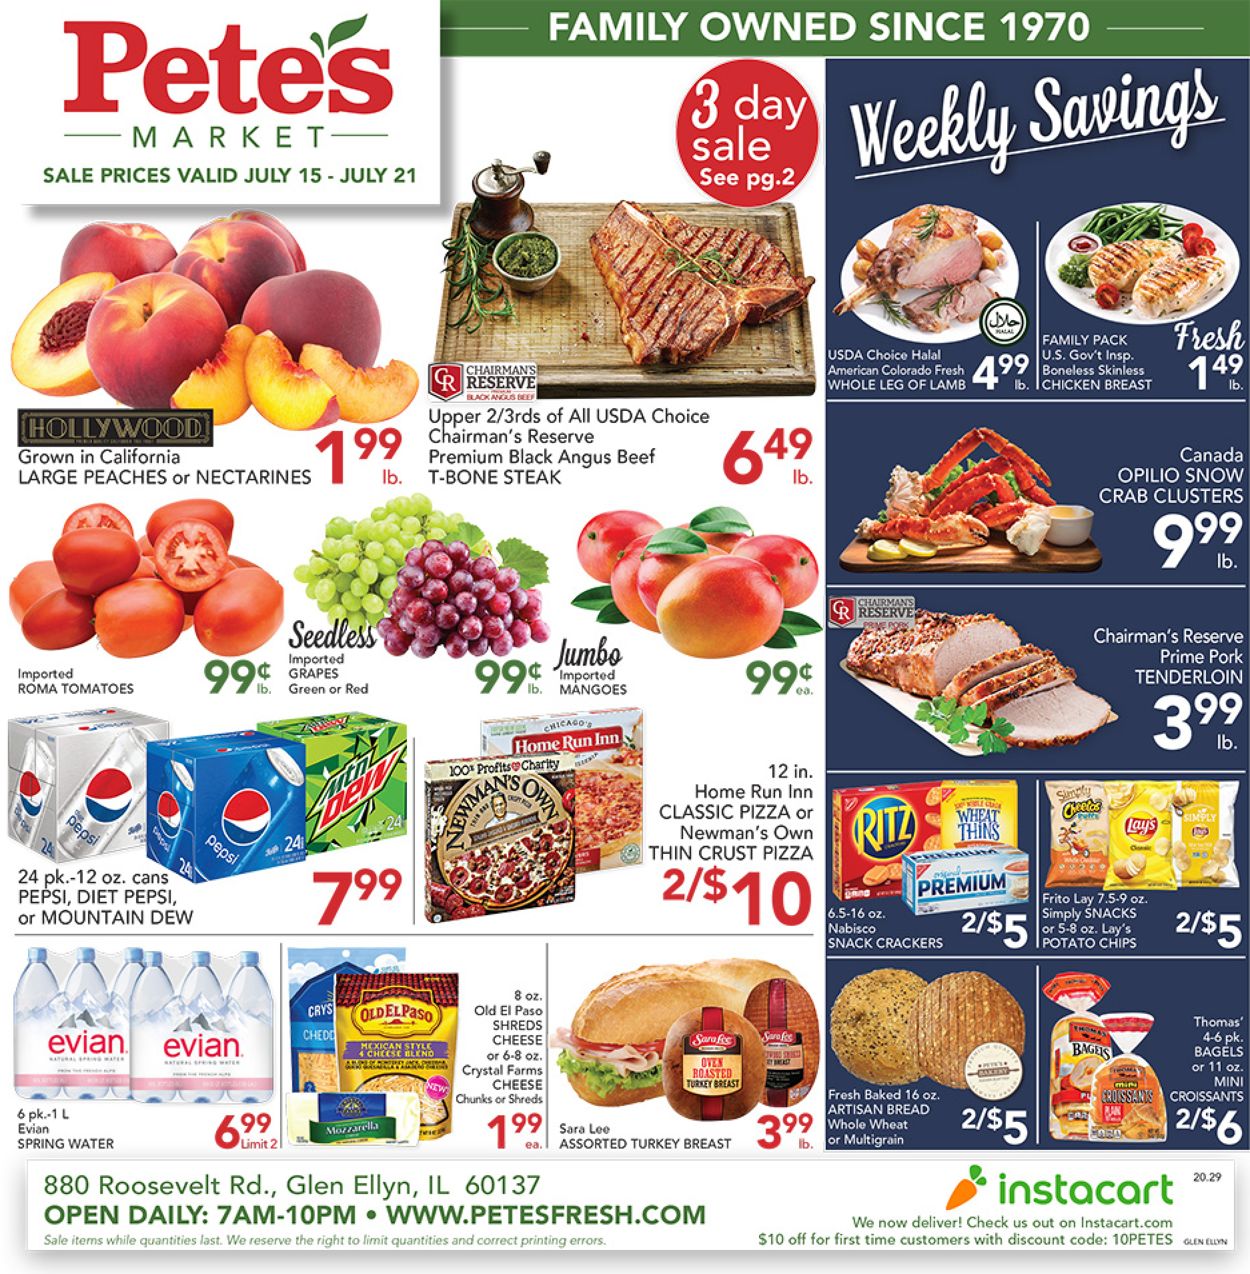 Pete's Fresh Market Current weekly ad 07/15 - 07/21/2020.